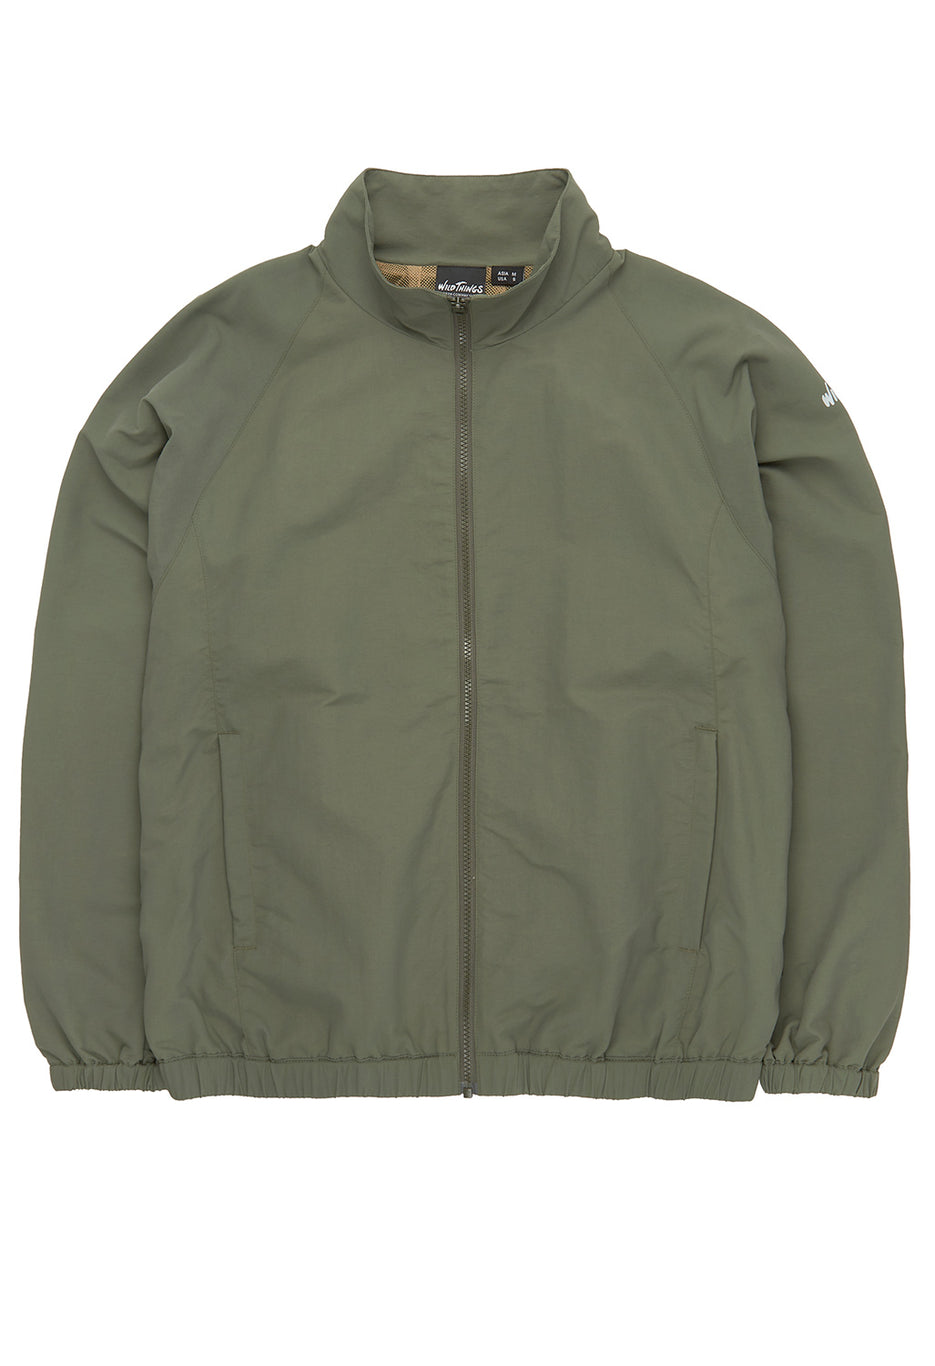 Wild Things Men's WT Army Jacket - O.D